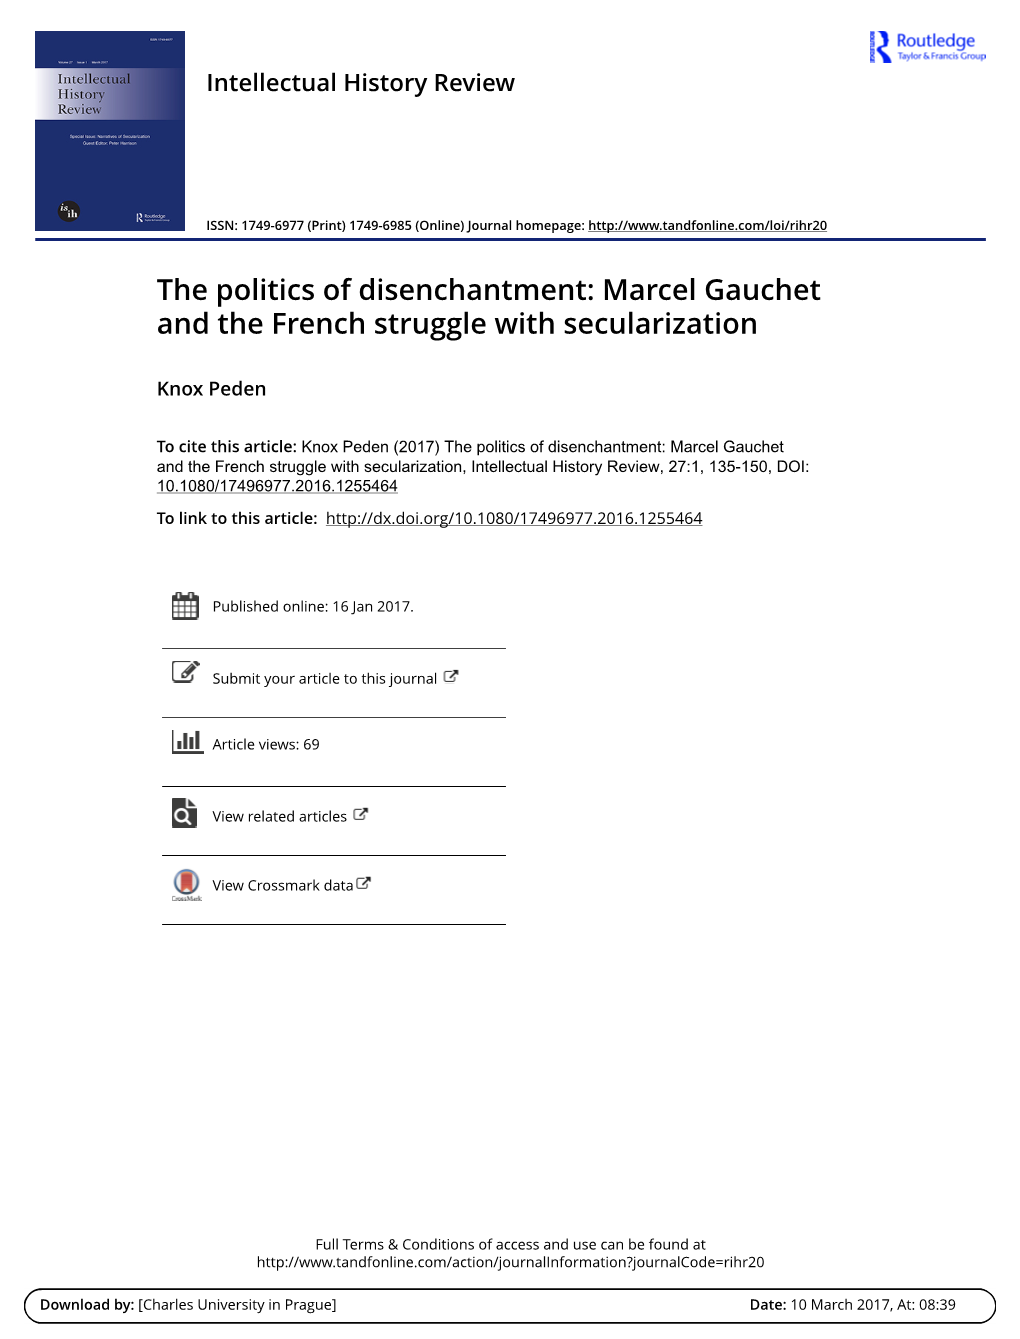 The Politics of Disenchantment: Marcel Gauchet and the French Struggle with Secularization